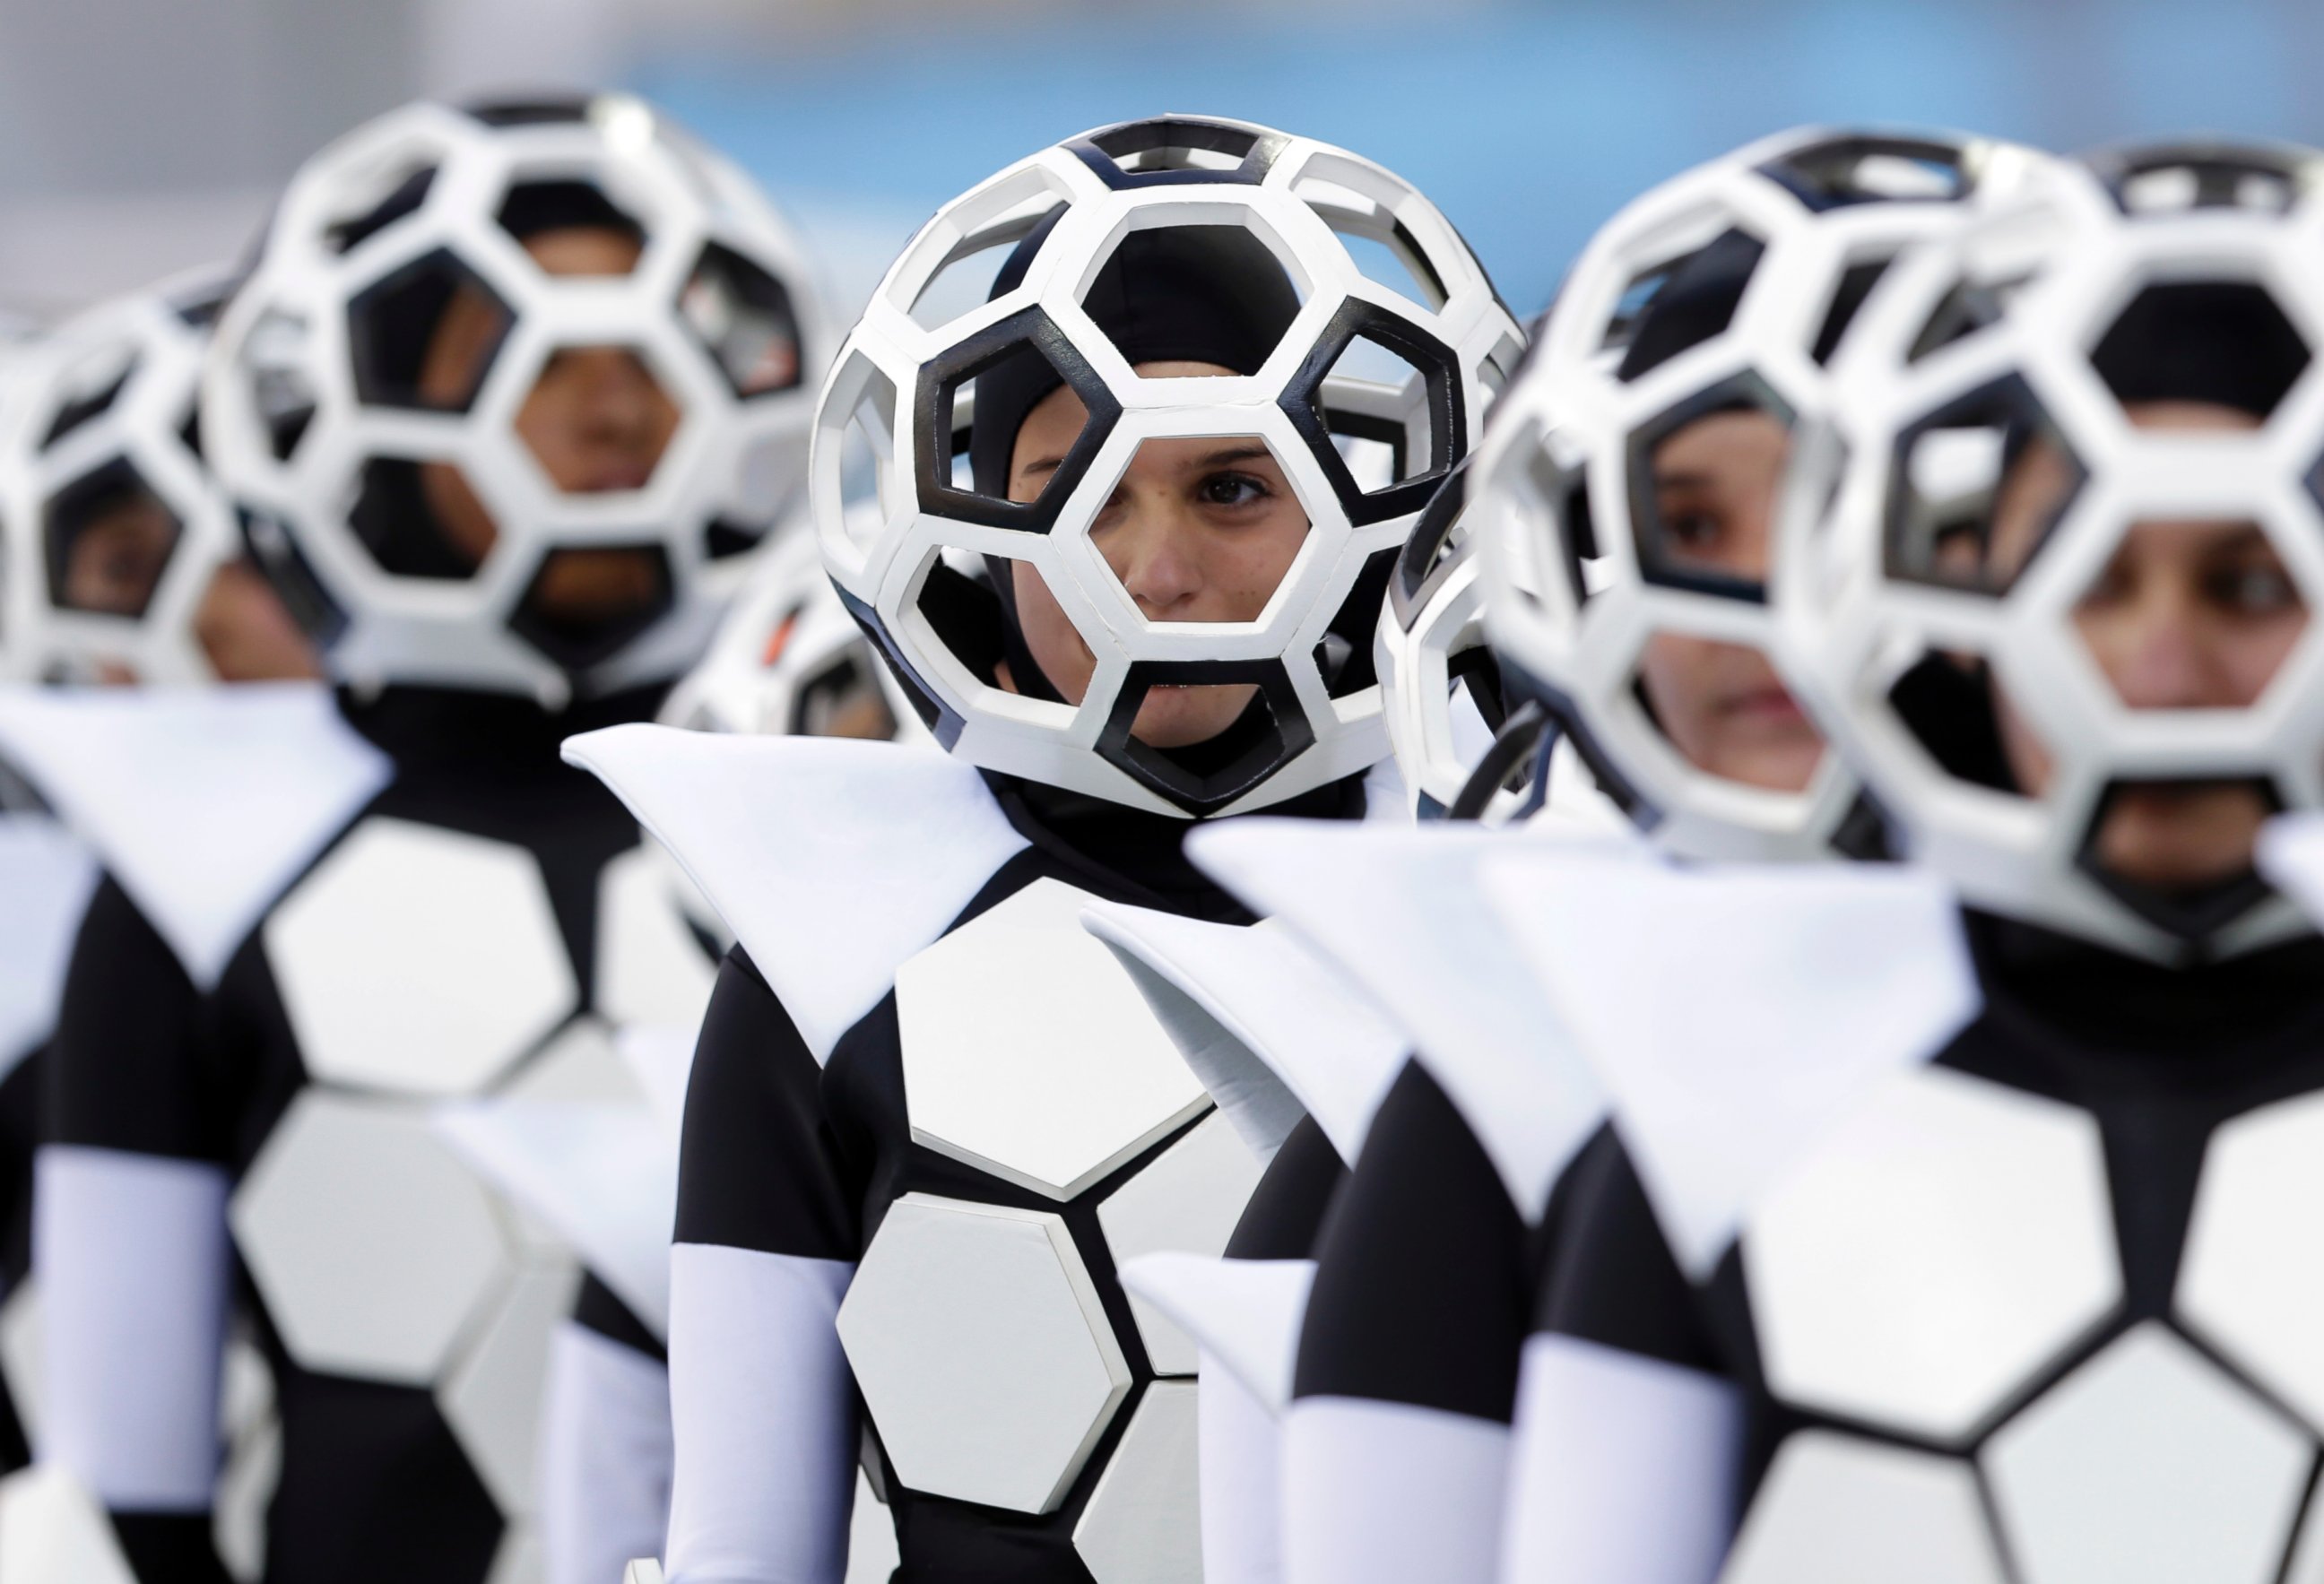 PHOTO: Actors perform during the opening ceremony before the group A World Cup soccer match between Brazil and Croatia, the opening game of the tournament, in the Itaquerao Stadium in Sao Paulo, Brazil, June 12, 2014.  